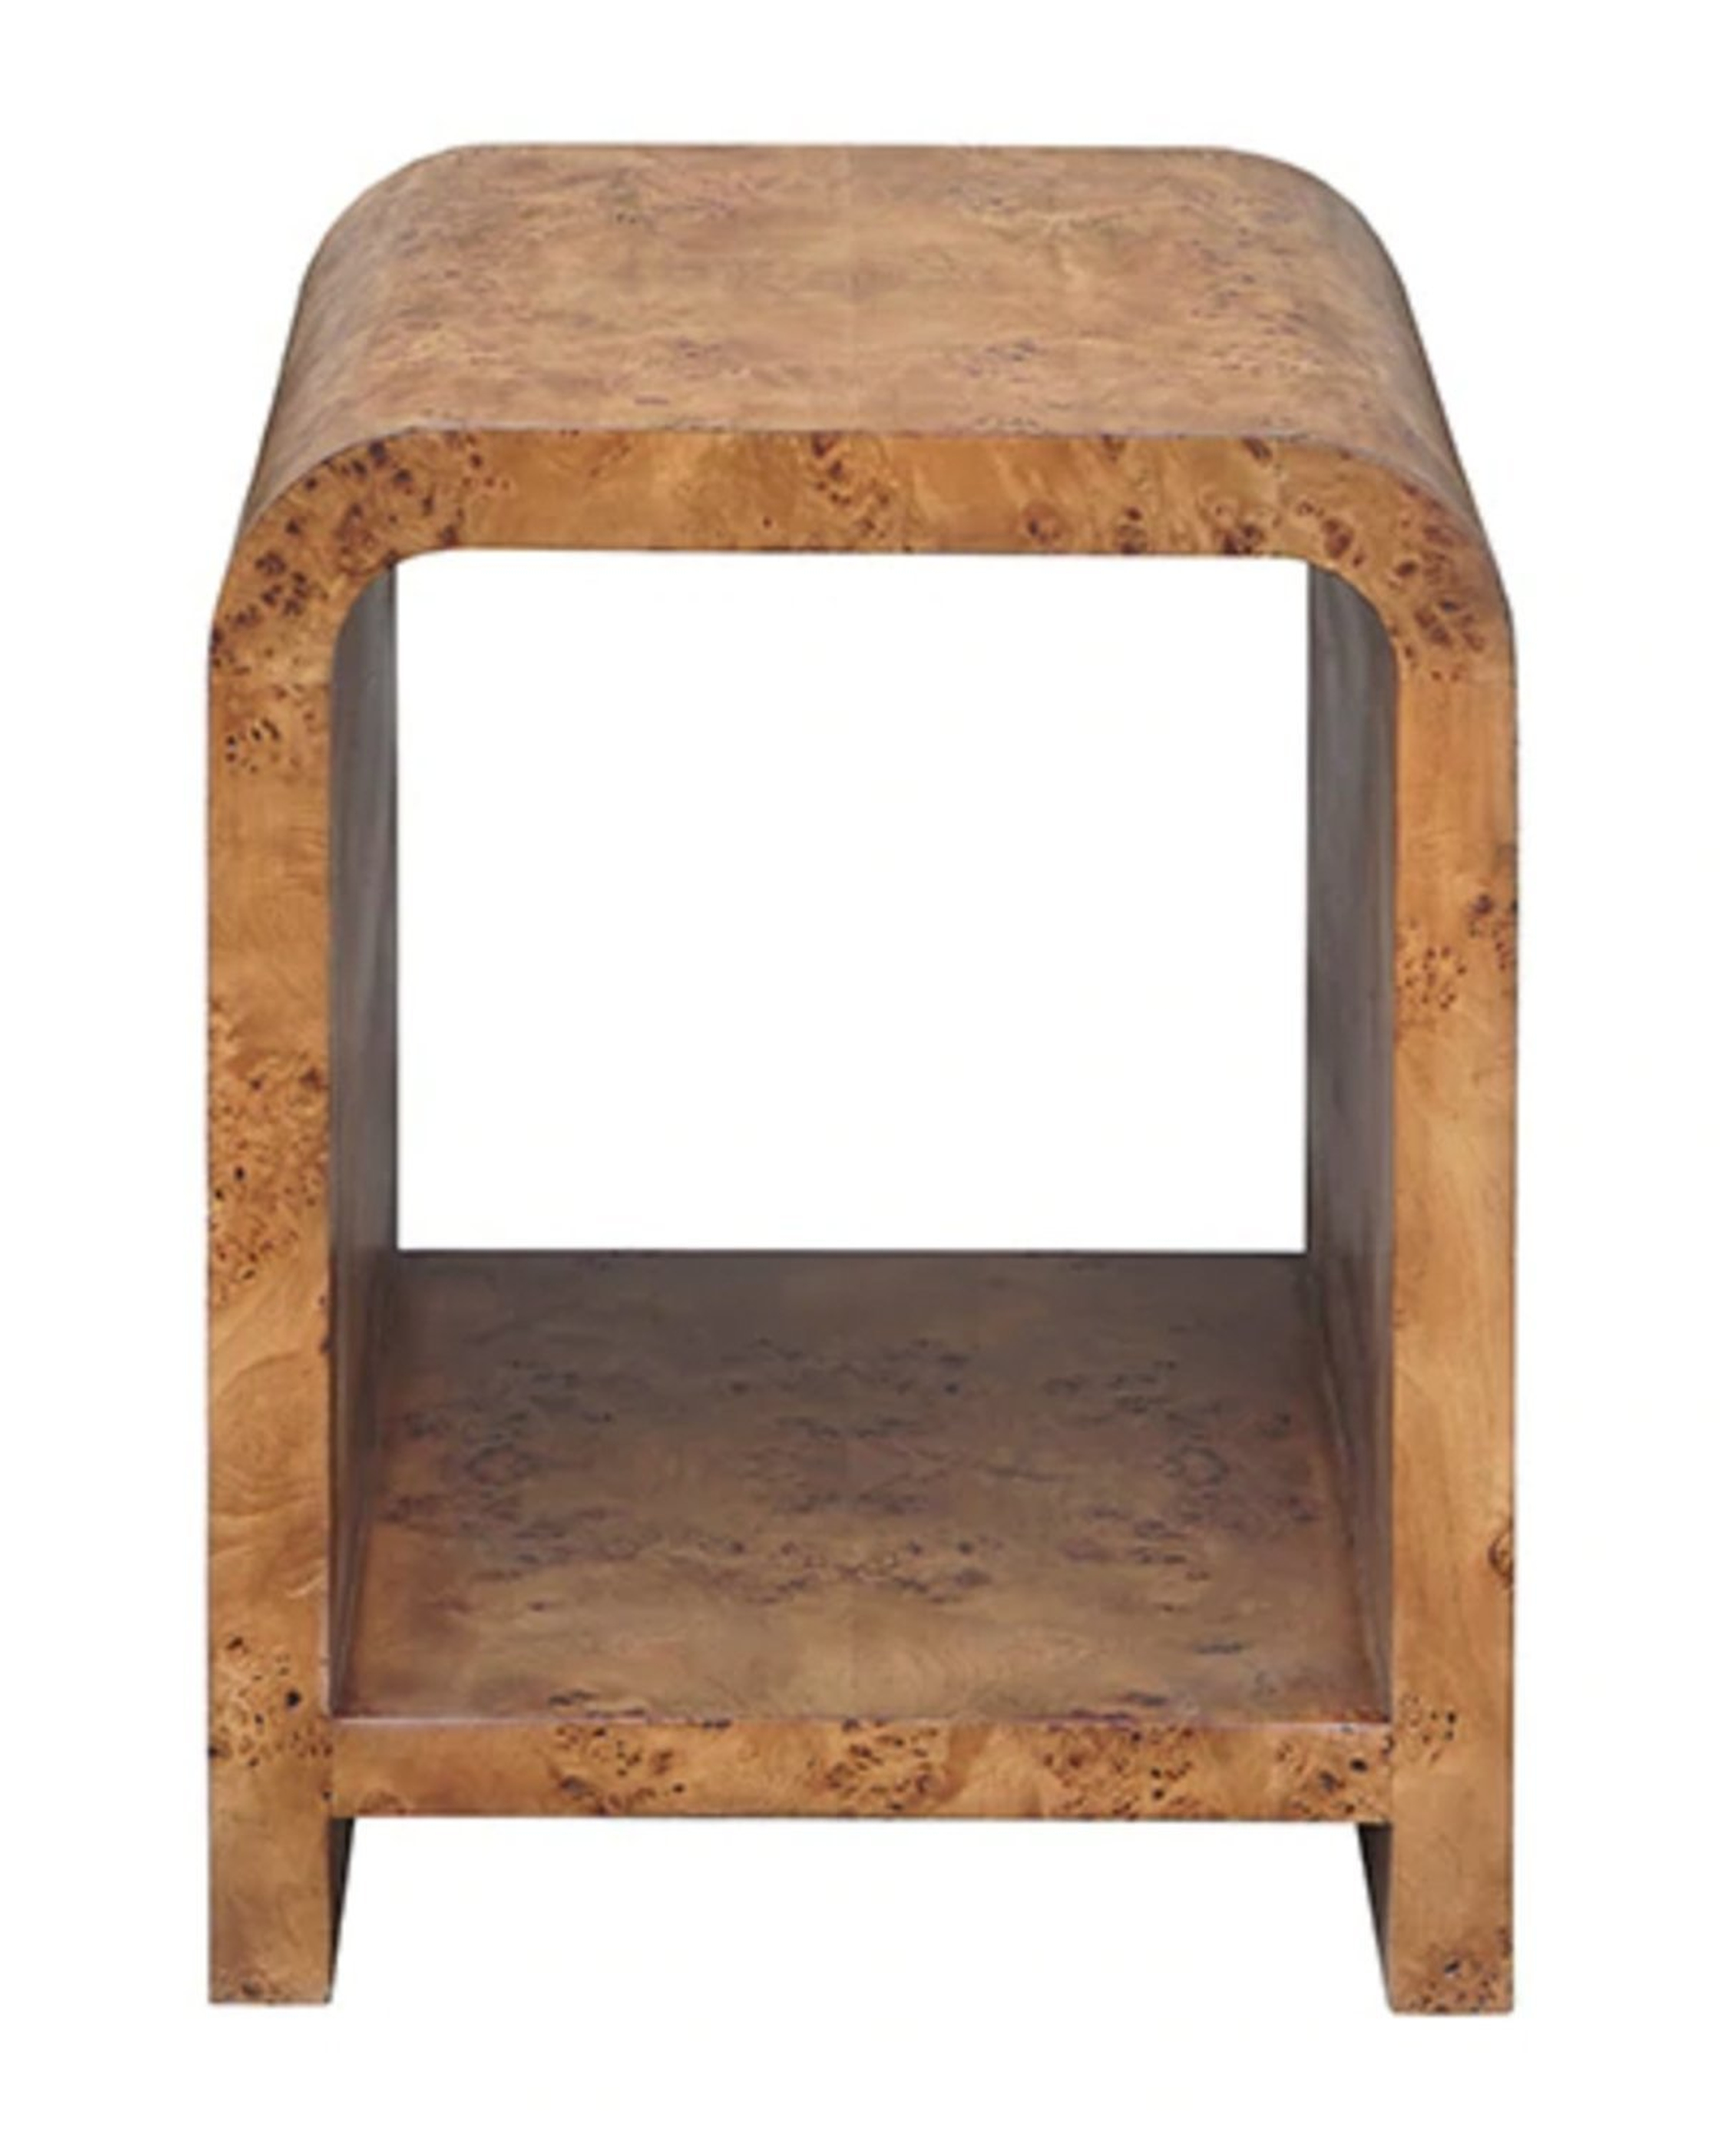 MARDEL SIDE TABLE - McGee & Co.